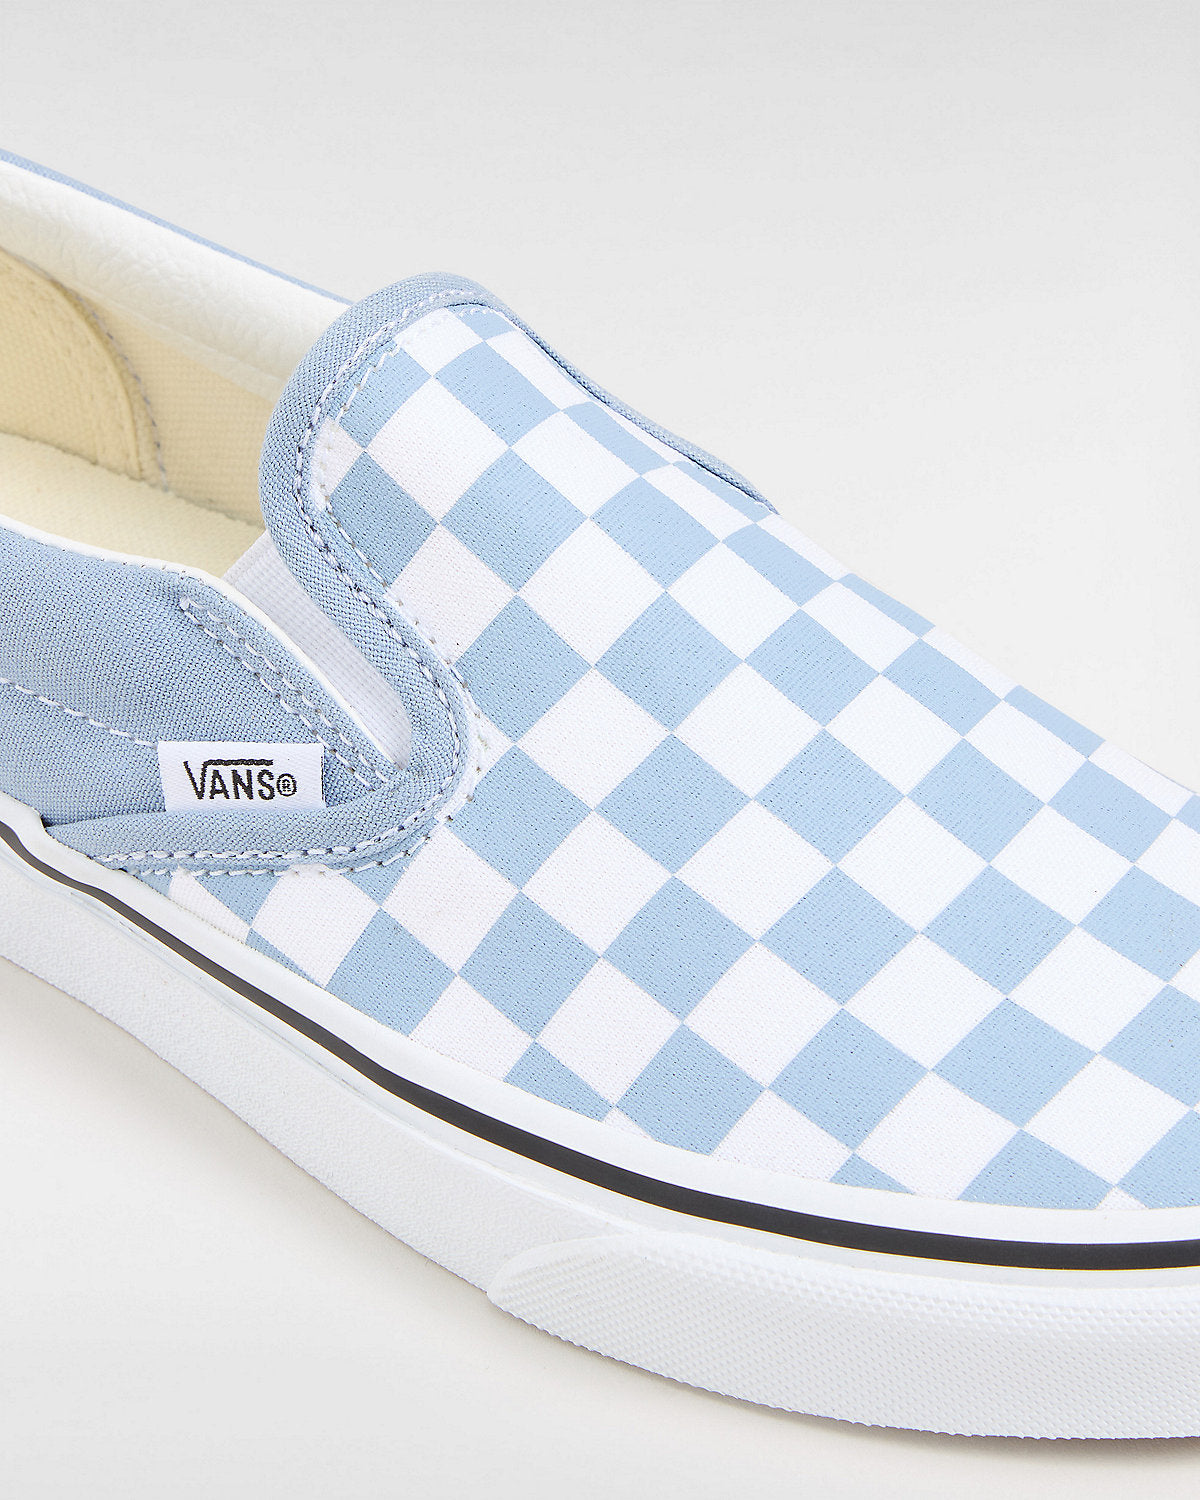 VANS Unisex Classic Slip-On Color Theory Checkerboard Trainers - Dusty Blue